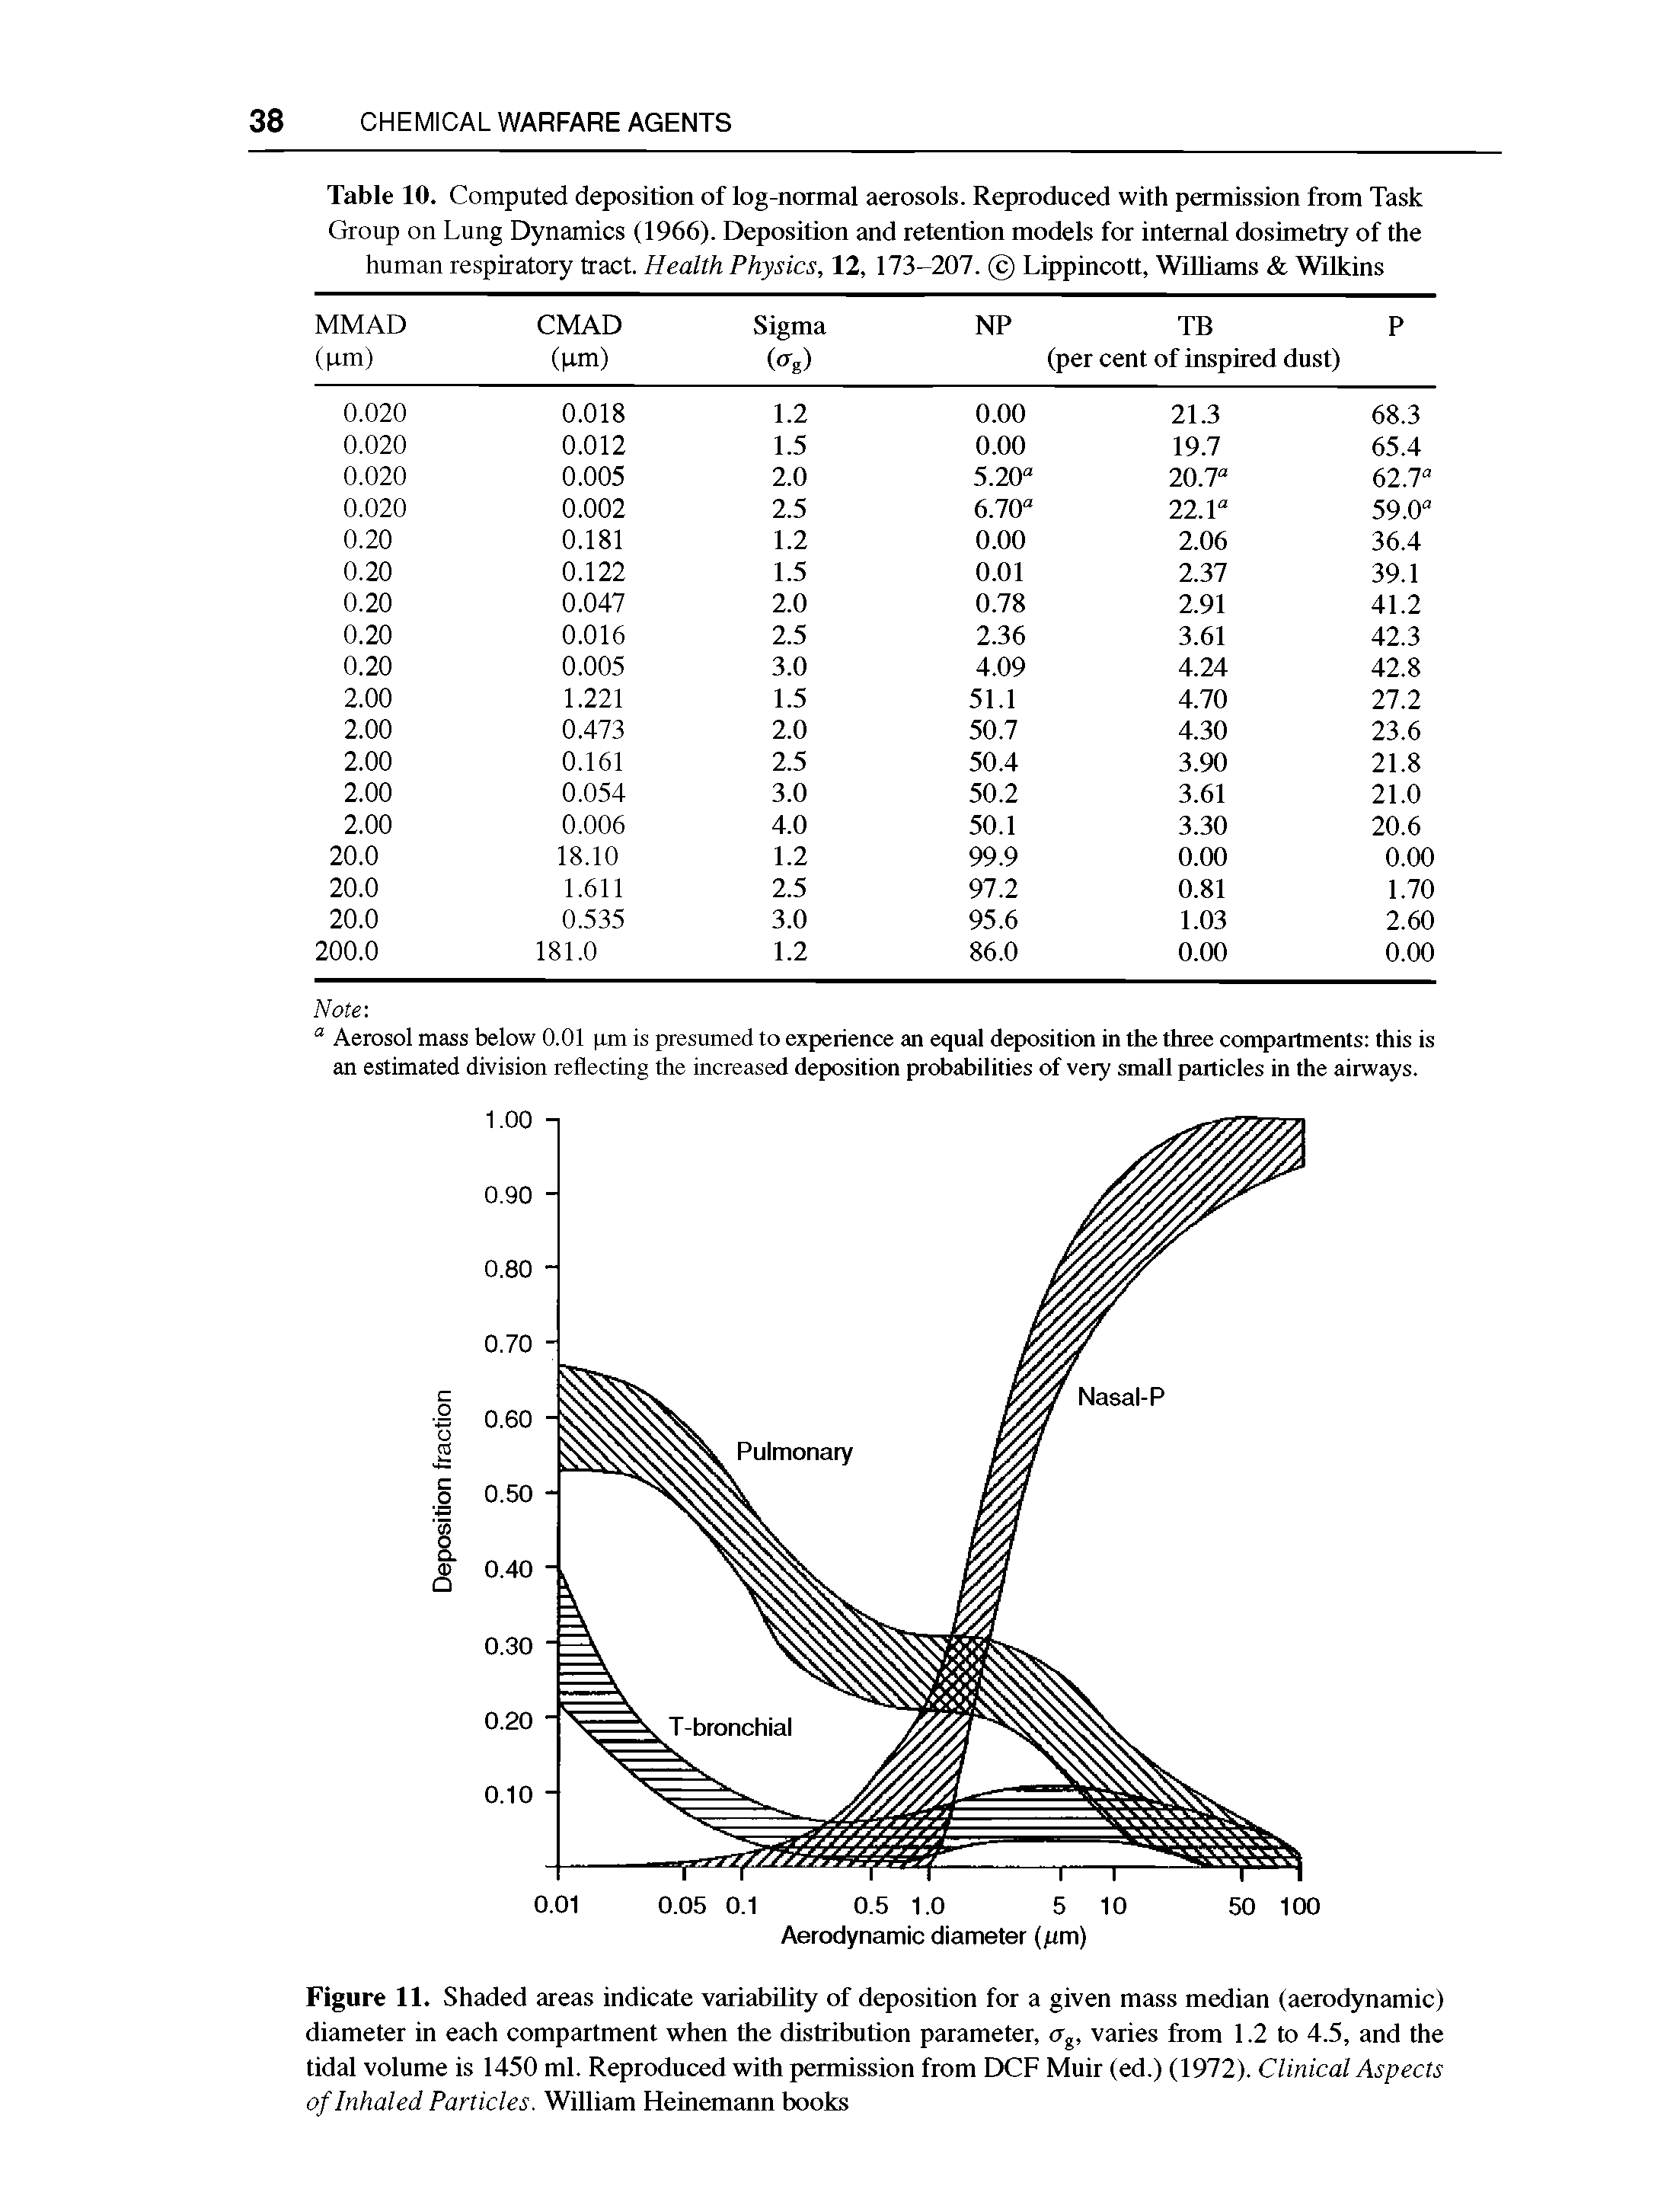 Figure 11. Shaded areas indicate variability of deposition for a given mass median (aerodynamic) diameter in each compartment when the distribution parameter, <rg, varies from 1.2 to 4.5, and the tidal volume is 1450 ml. Reproduced with permission from DCF Muir (ed.) (1972). Clinical Aspects of Inhaled Particles. William Heinemann books...